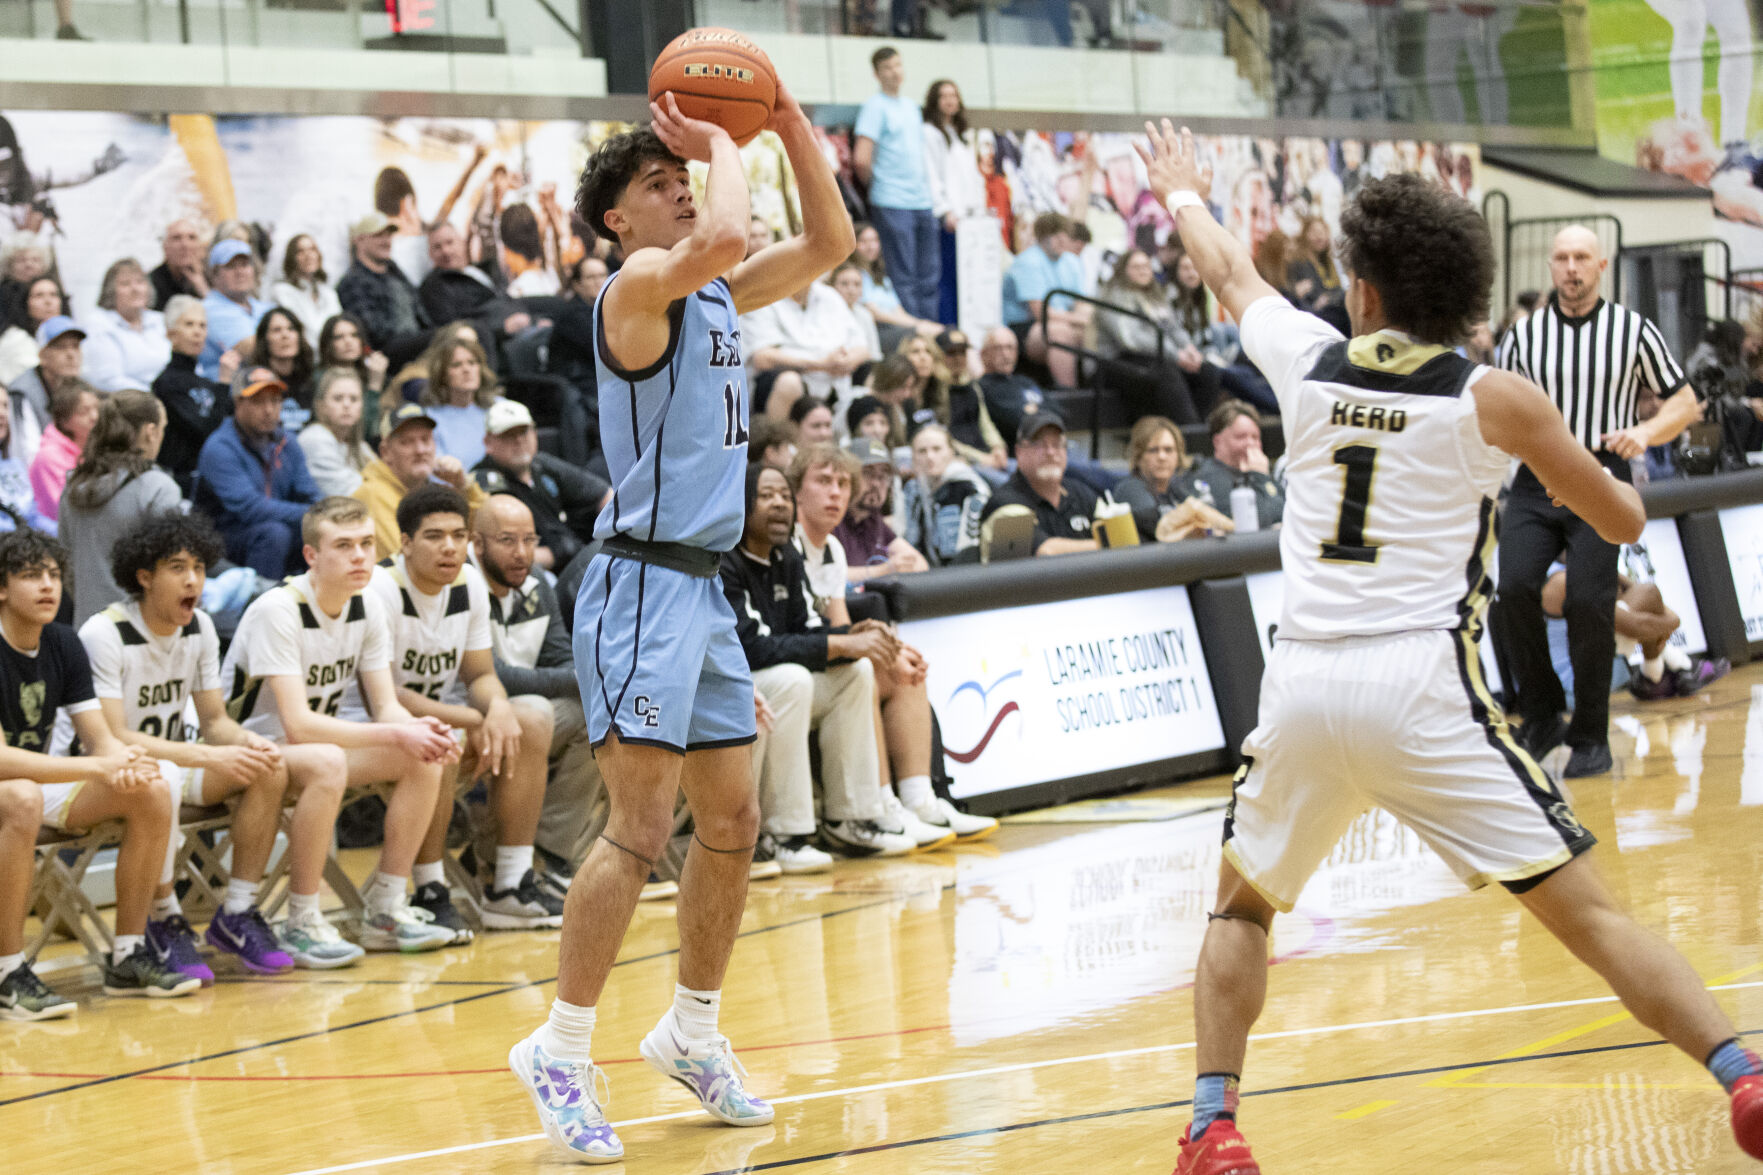 Cheyenne East Storms Back to Defeat Cheyenne South 61-41 in High School Basketball Game